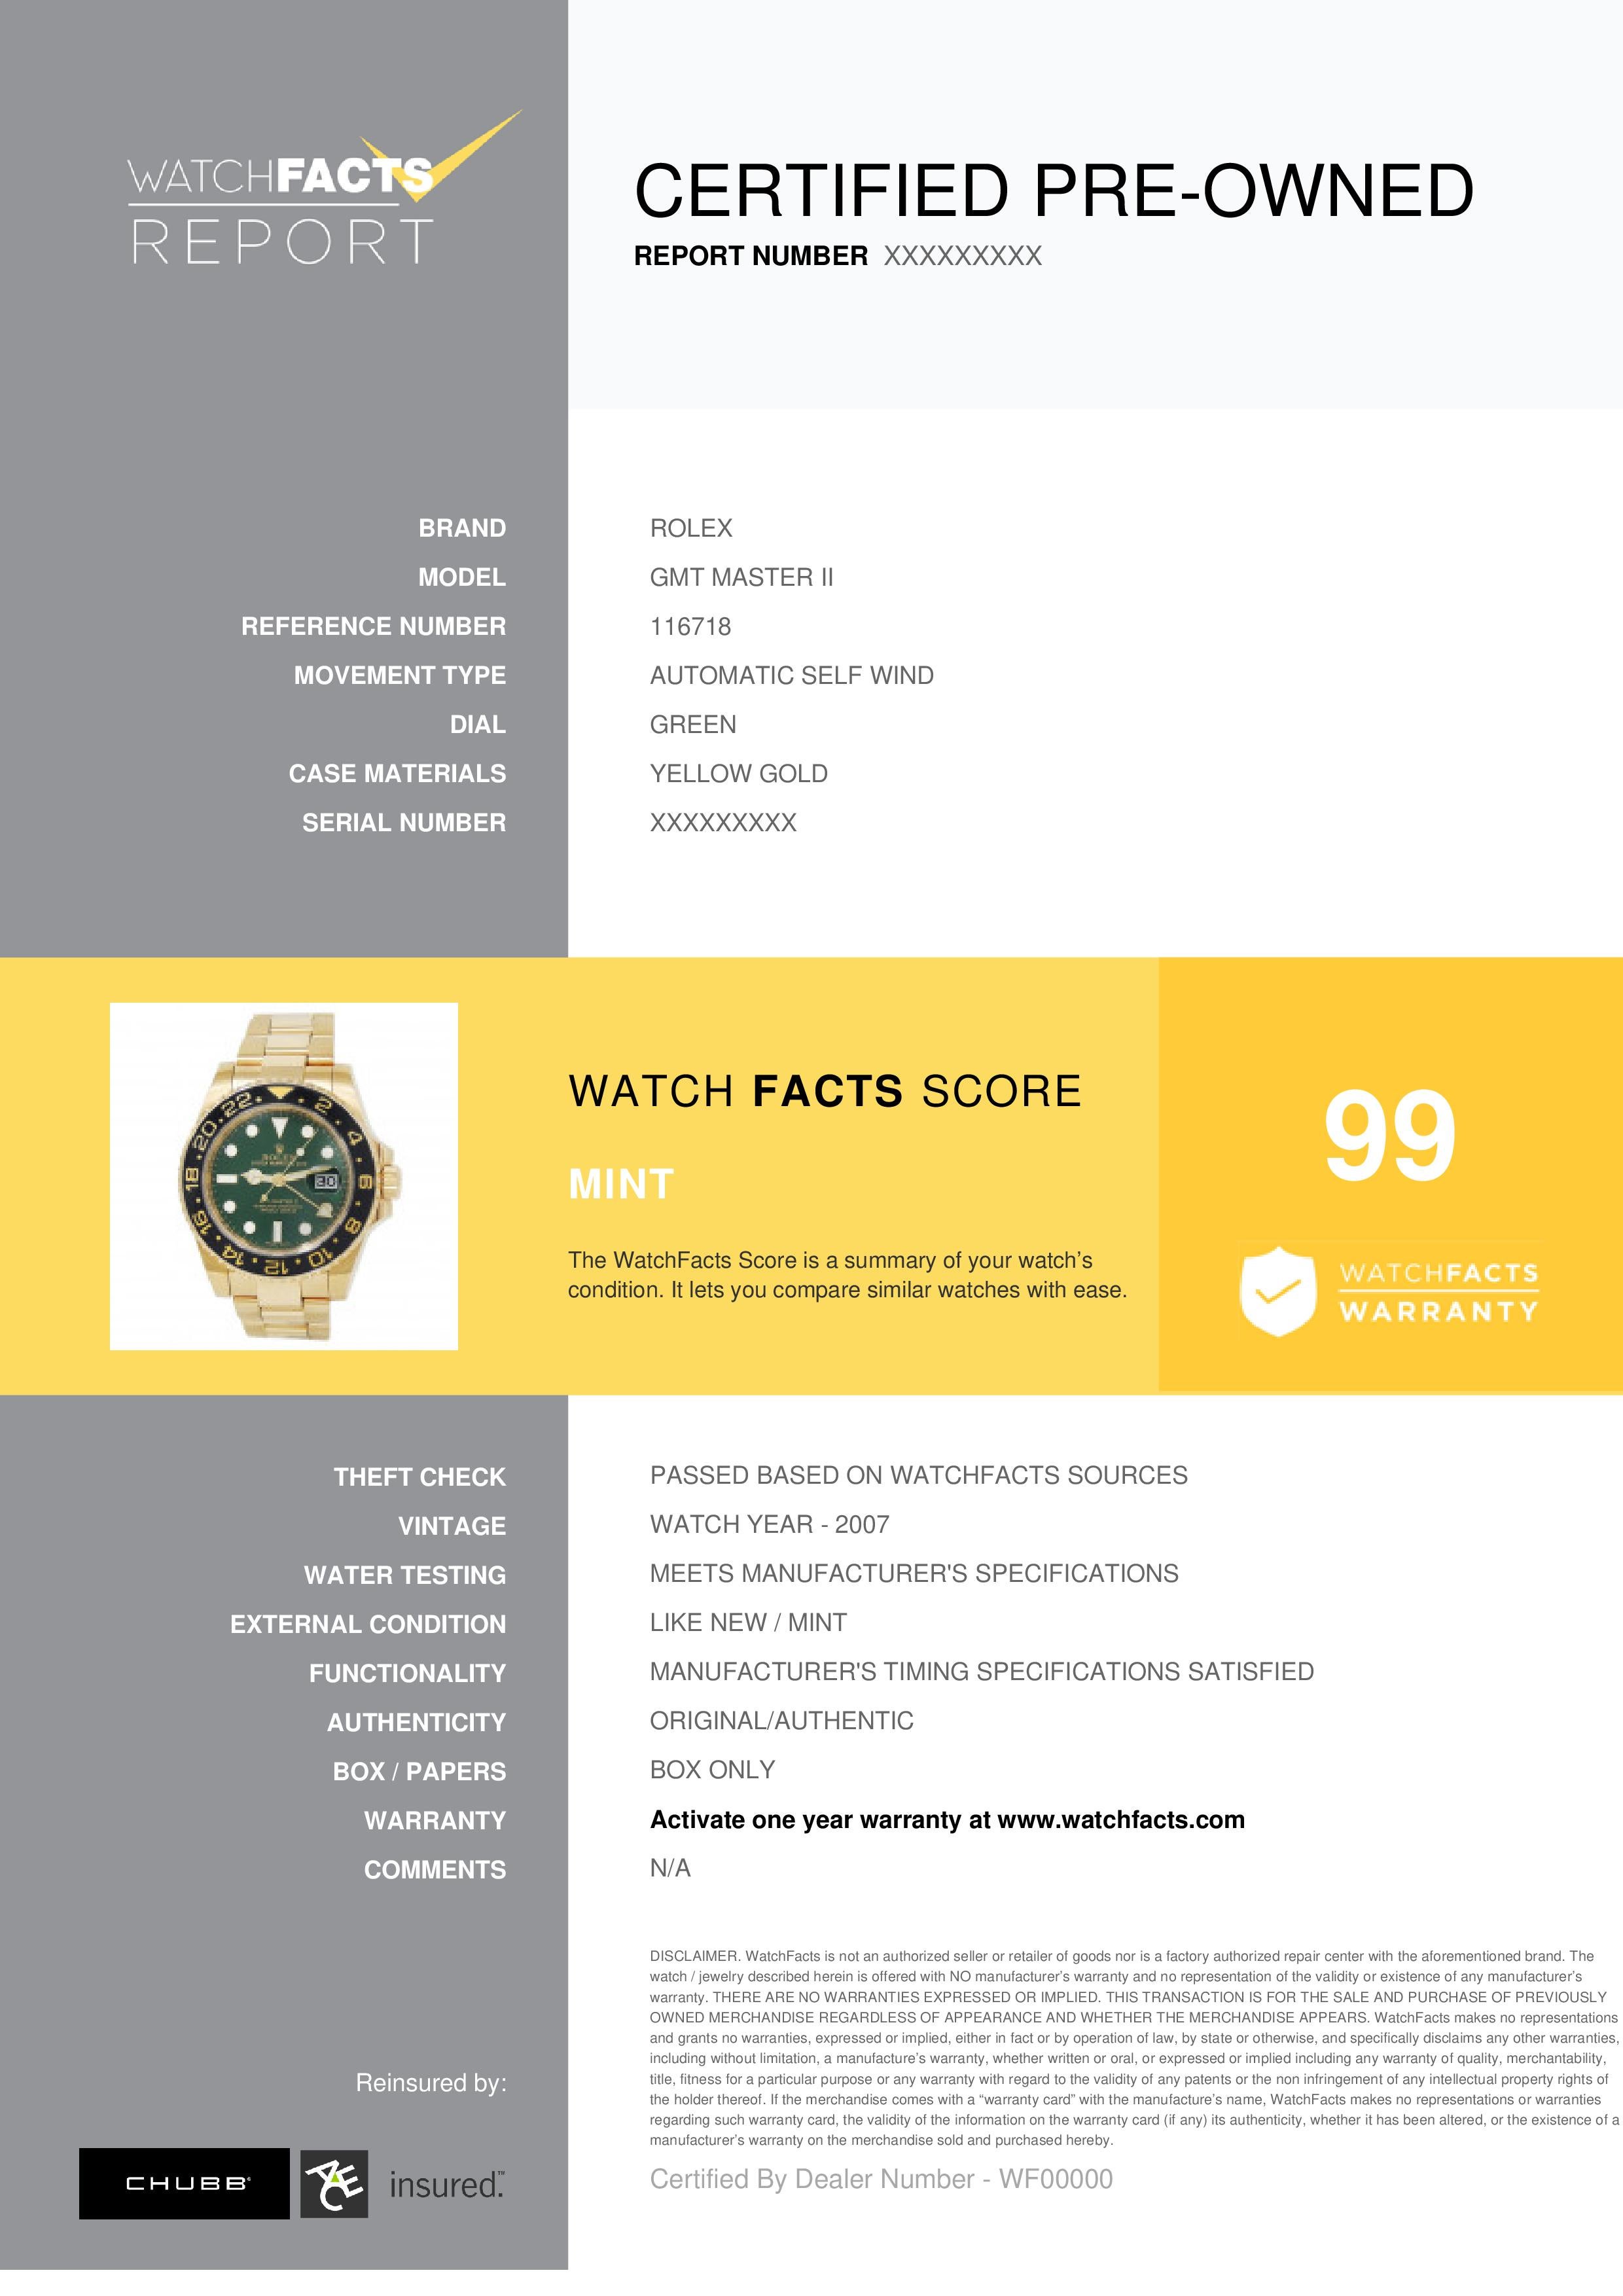 Rolex GMT Master II Reference #: 116718. Mens Automatic Self Wind Watch Yellow Gold Green 40 MM. Verified and Certified by WatchFacts. 1 year warranty offered by WatchFacts.
